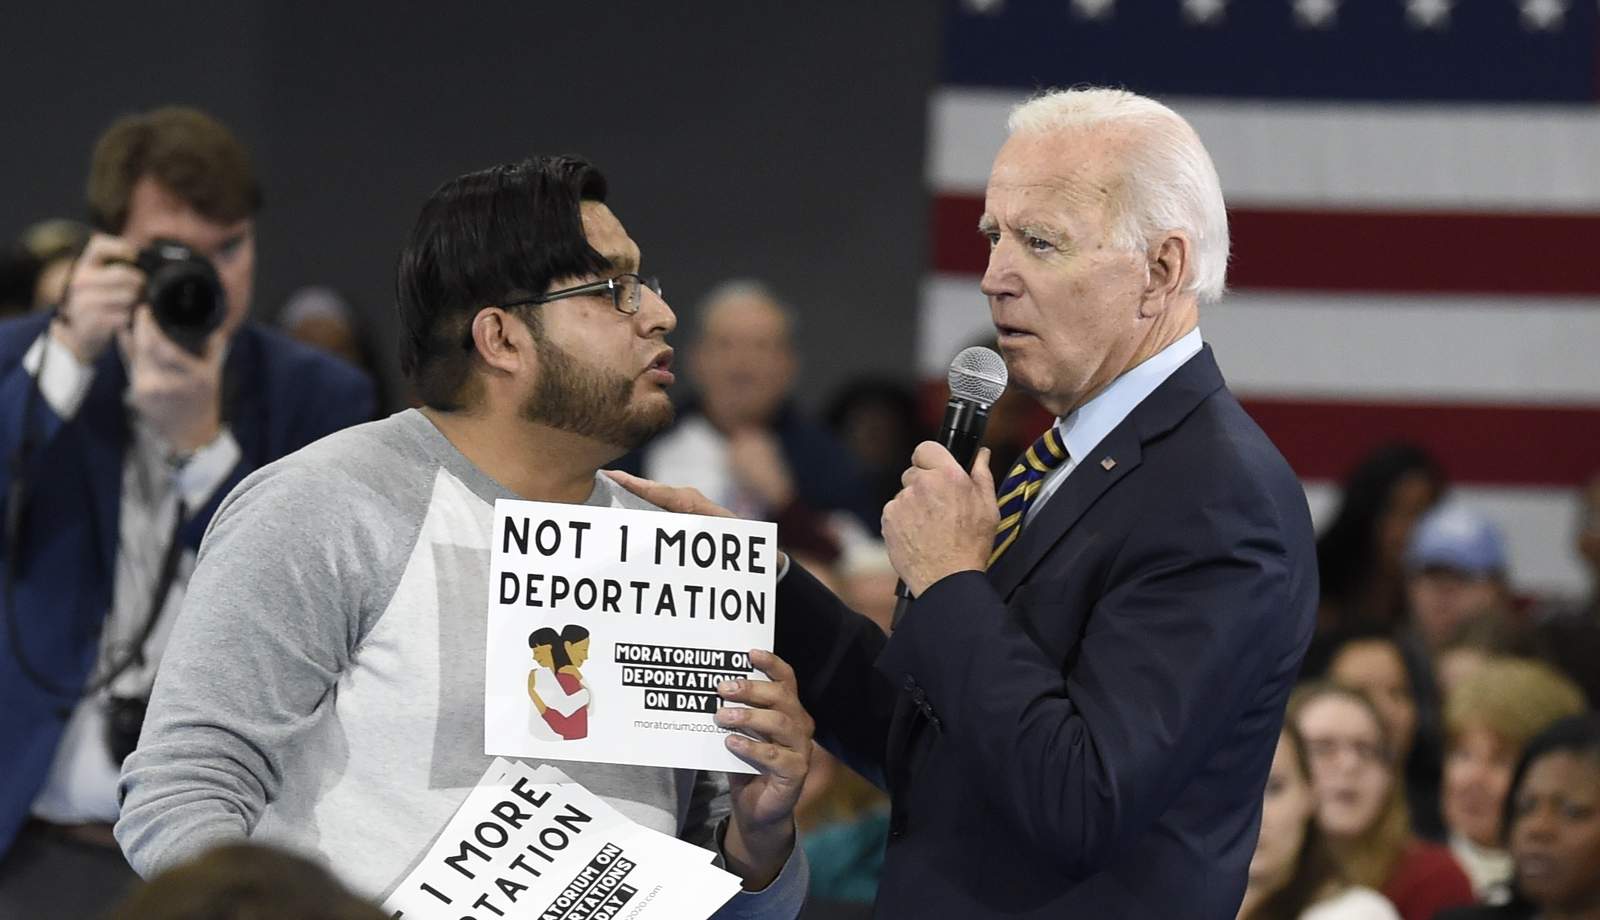 Live stream: Biden to sign executive orders updating immigration system